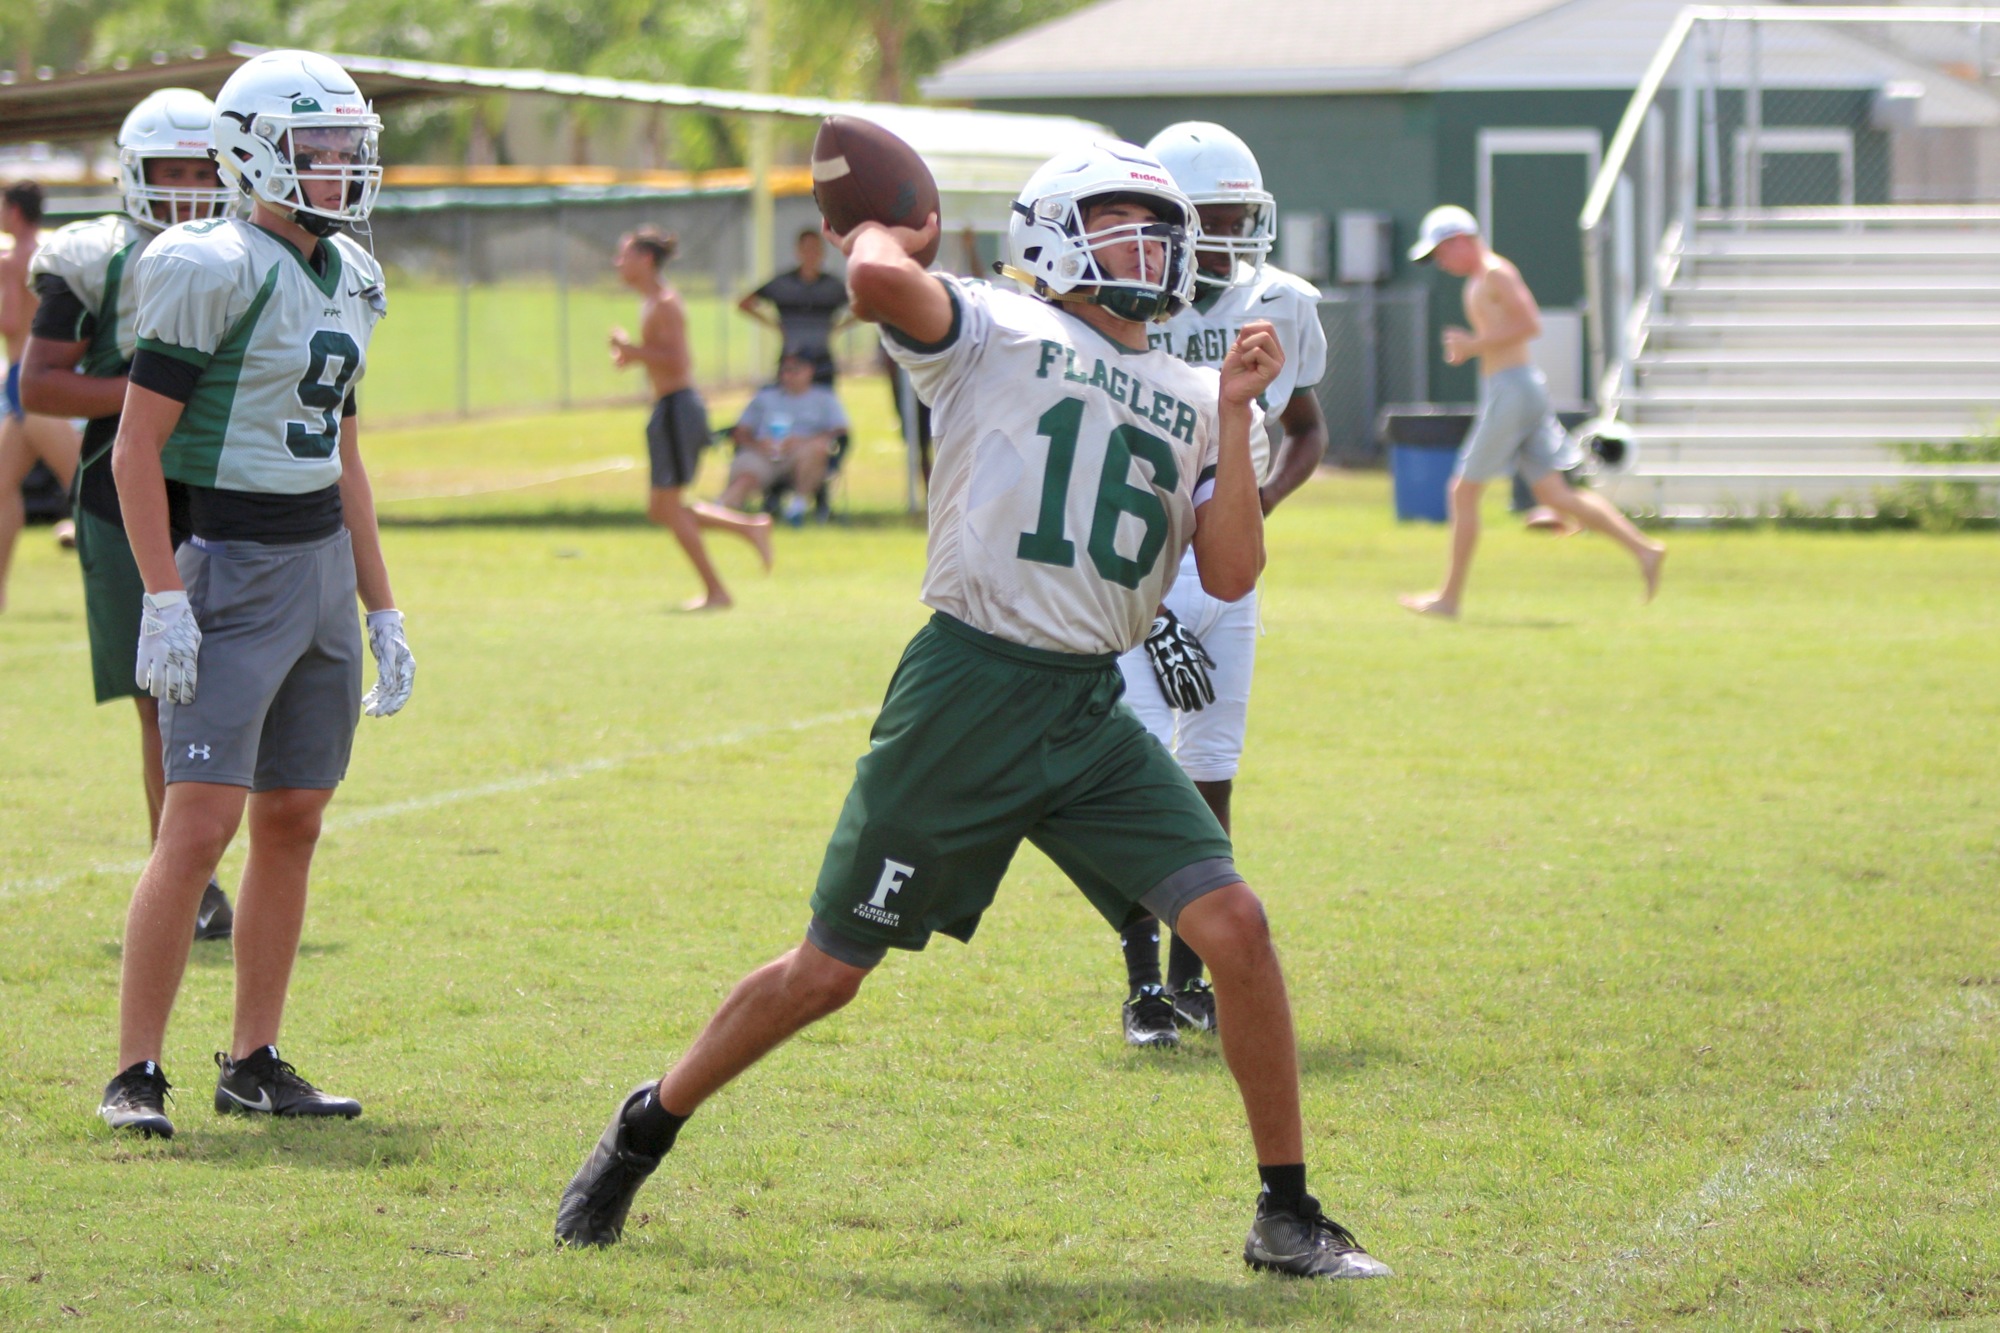 FPC Quarterback Ryan Freeman throws a pass at practice. Photo by Ray Boone